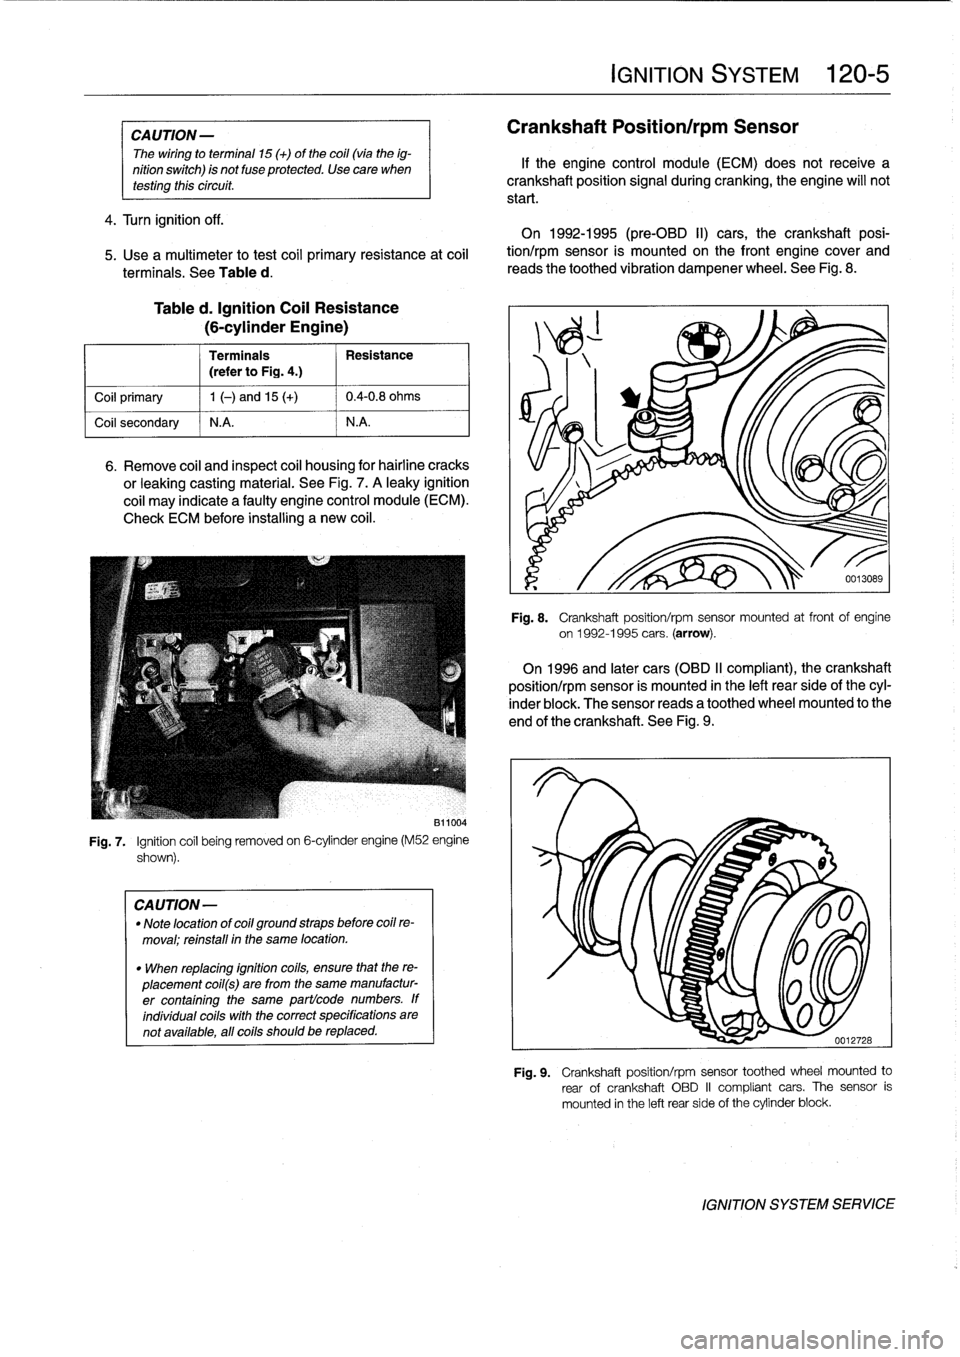 BMW 318i 1997 E36 Workshop Manual 
CAUTION
-

The
wiring
to
termina¡
15
(+)
of
the
coil(vía
the
ig-

nition
switch)
is
not
fuse
protected
.
Use
care
when
testíng
thiscircuit
.

4
.
Turn
ignition
off
.

5
.
Use
a
multimeter
to
test
